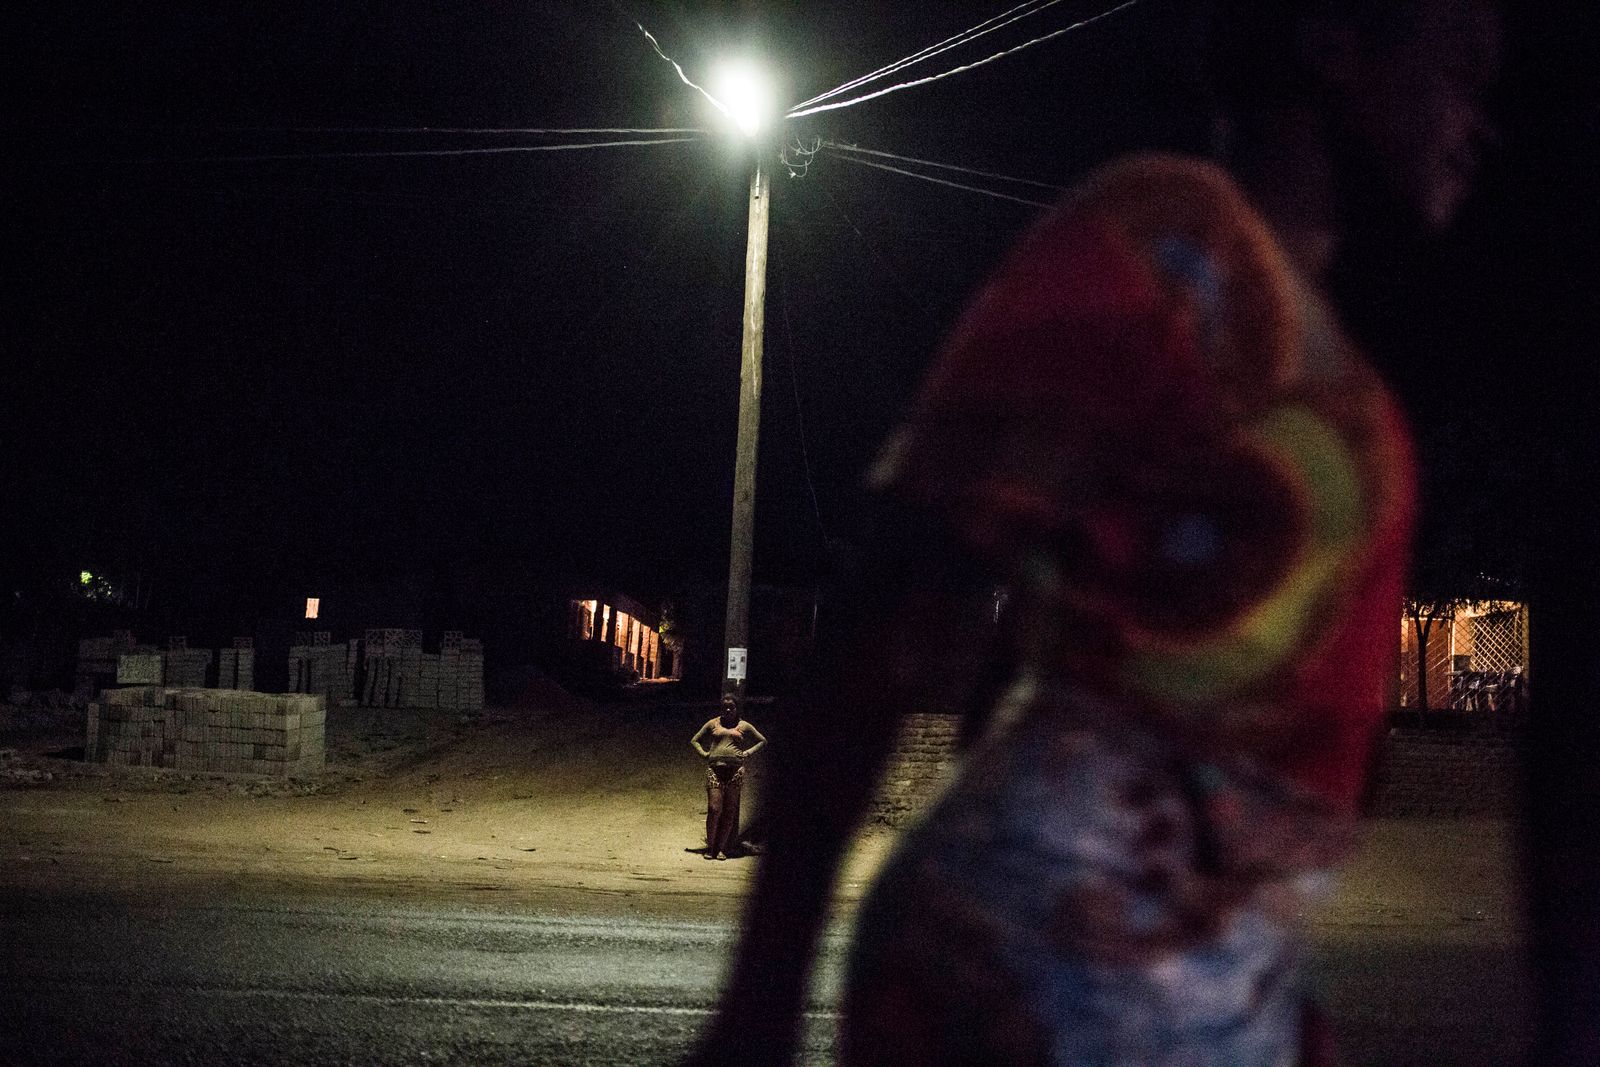 © TaraTW - A sex worker stands underneath a lamppost in Tete, Tete province, Mozambique May 11, 2018.